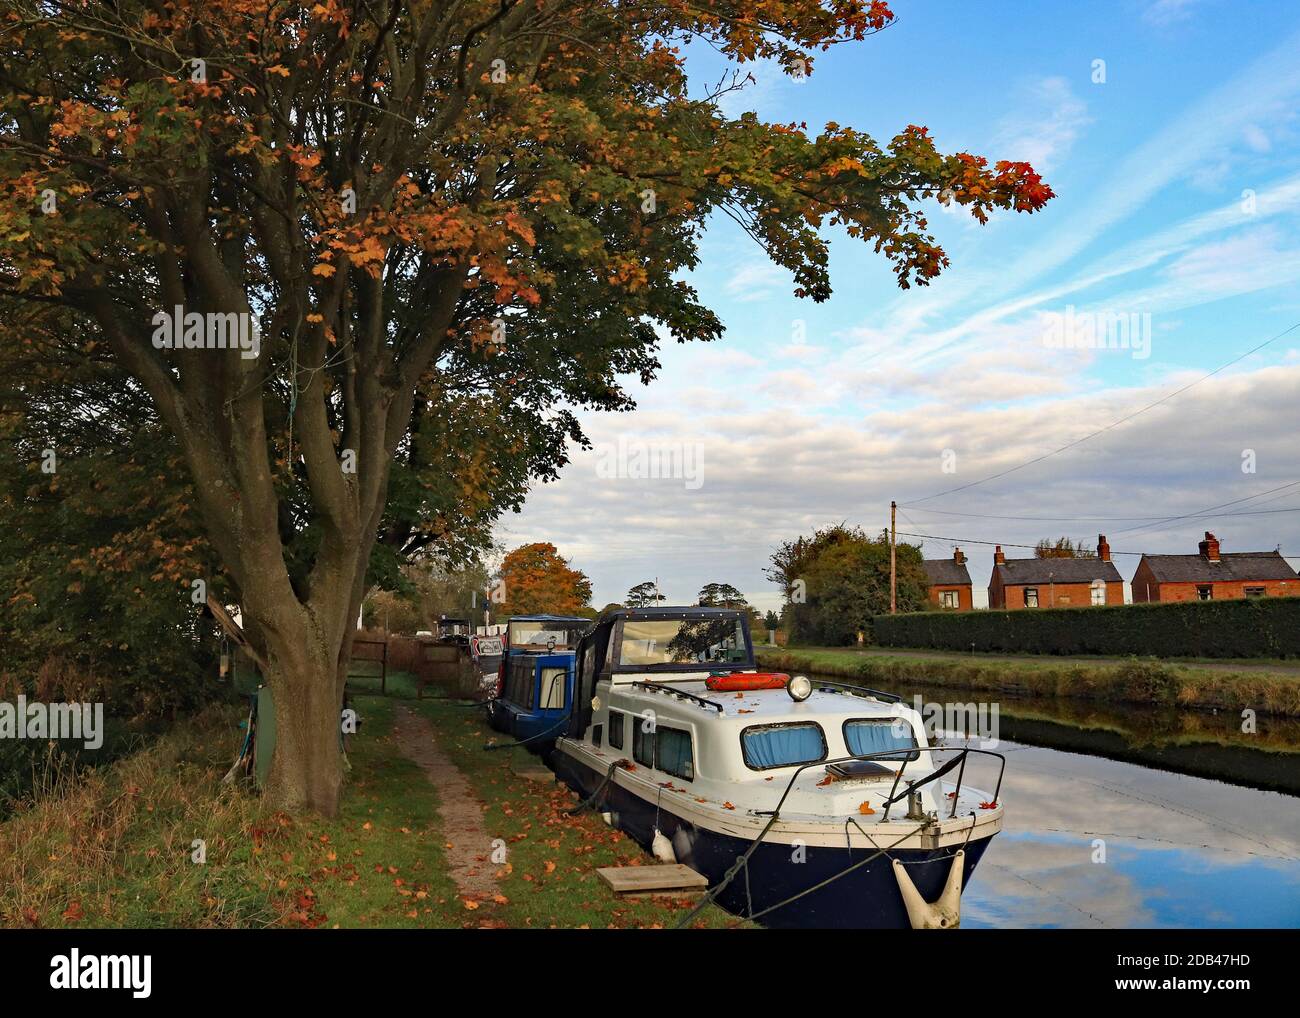 The sun catches the autumn colours against the blue skies over the canal boats moored at Crabtree Lane on the Leeds and Liverpool canal, Burscough. Stock Photo